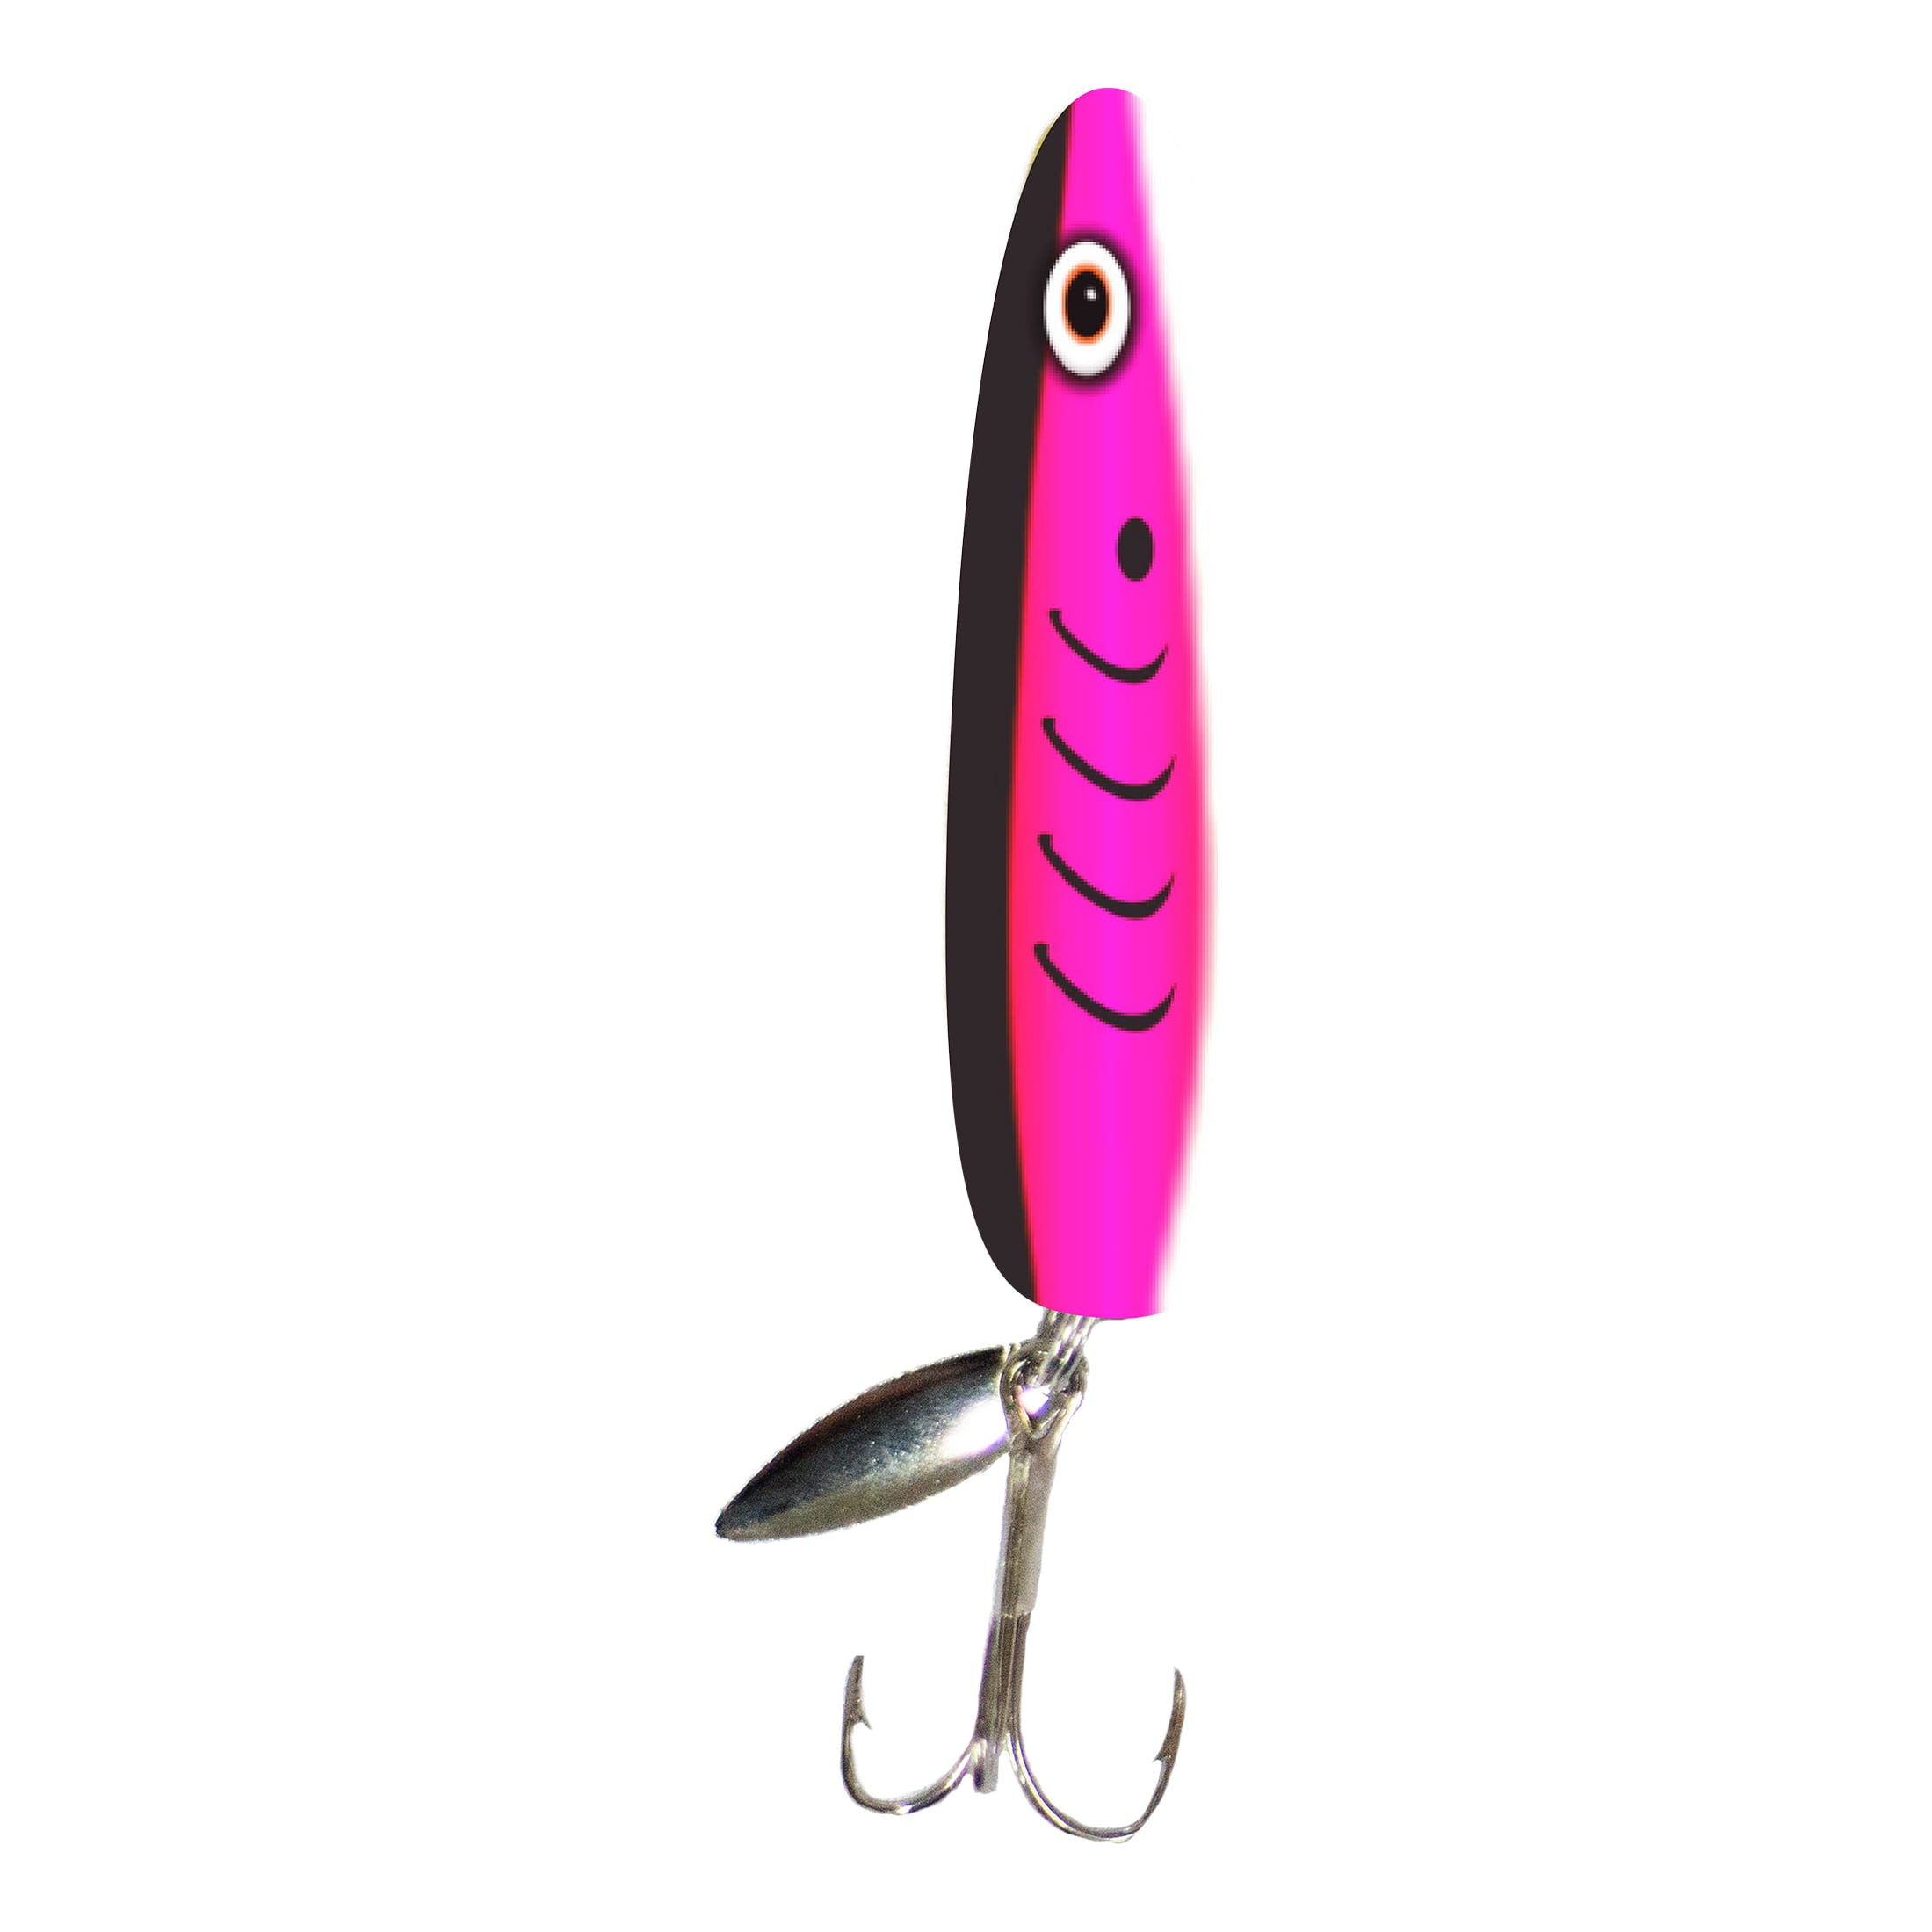 CenterFire Lures rigged with our Awesome Double Trouble Hooks at